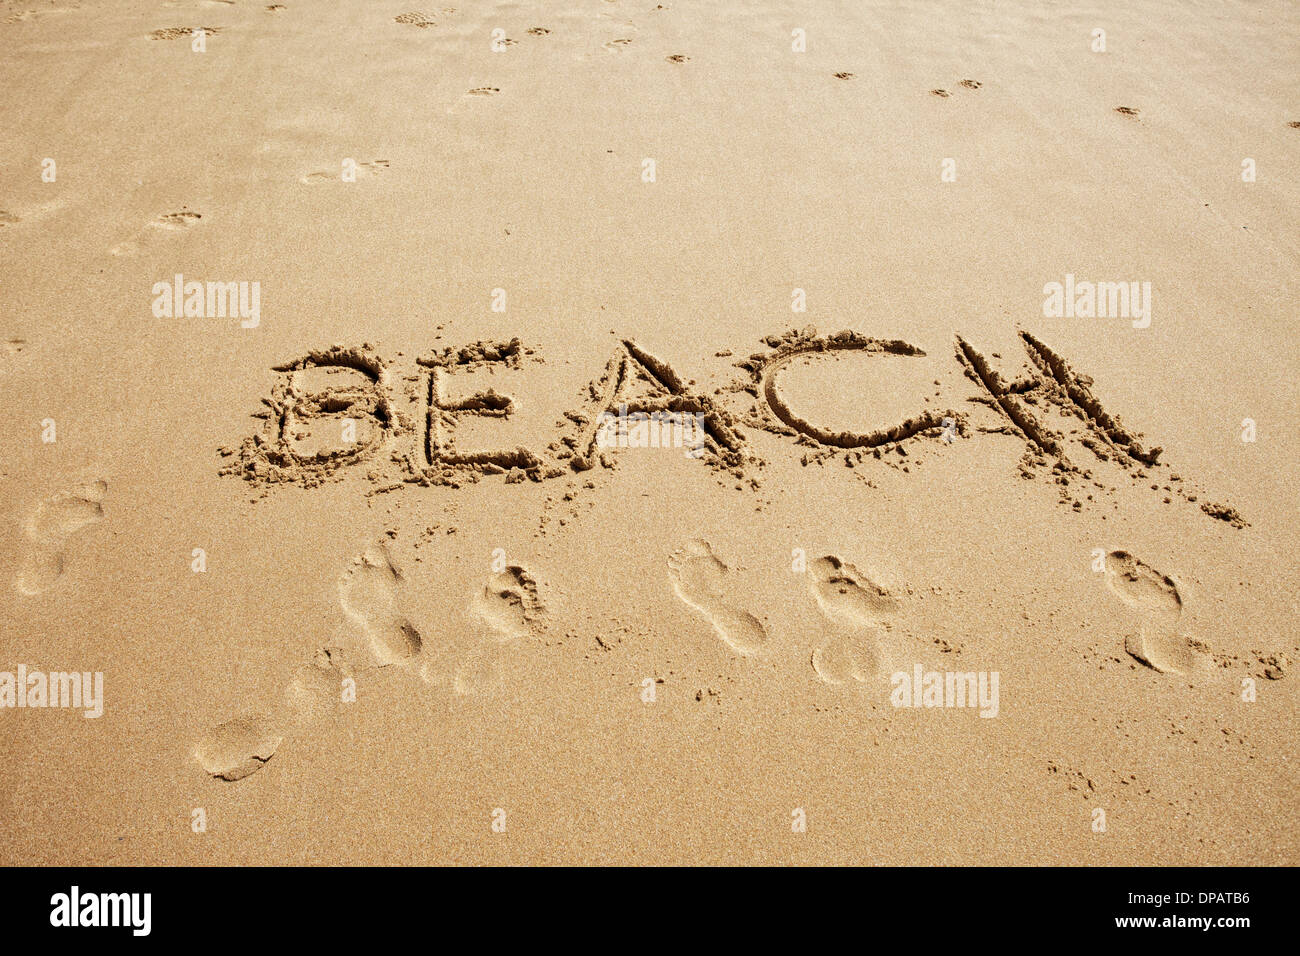 Message or greeting written in sand at the beach Stock Photo